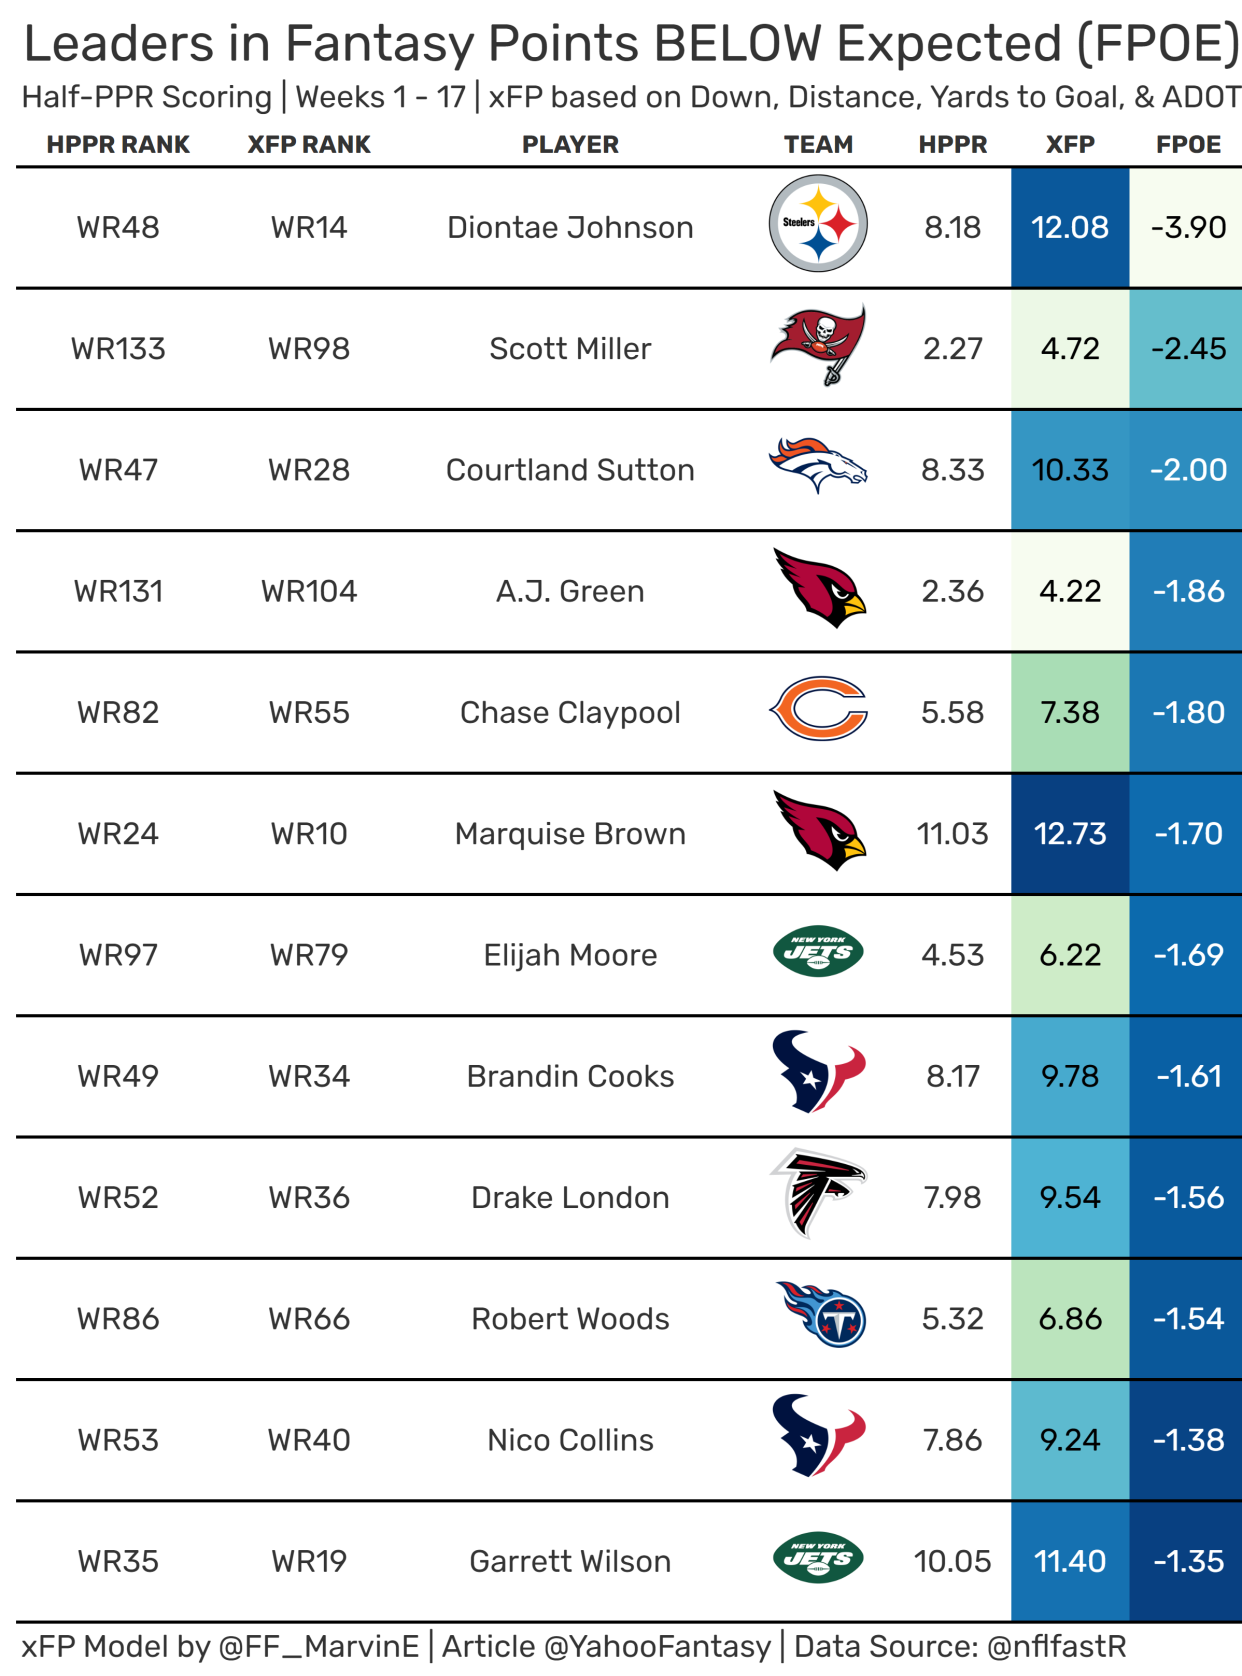 Wide Receiver leaders in fantasy points below expected. (Data courtesy of nflfastR)